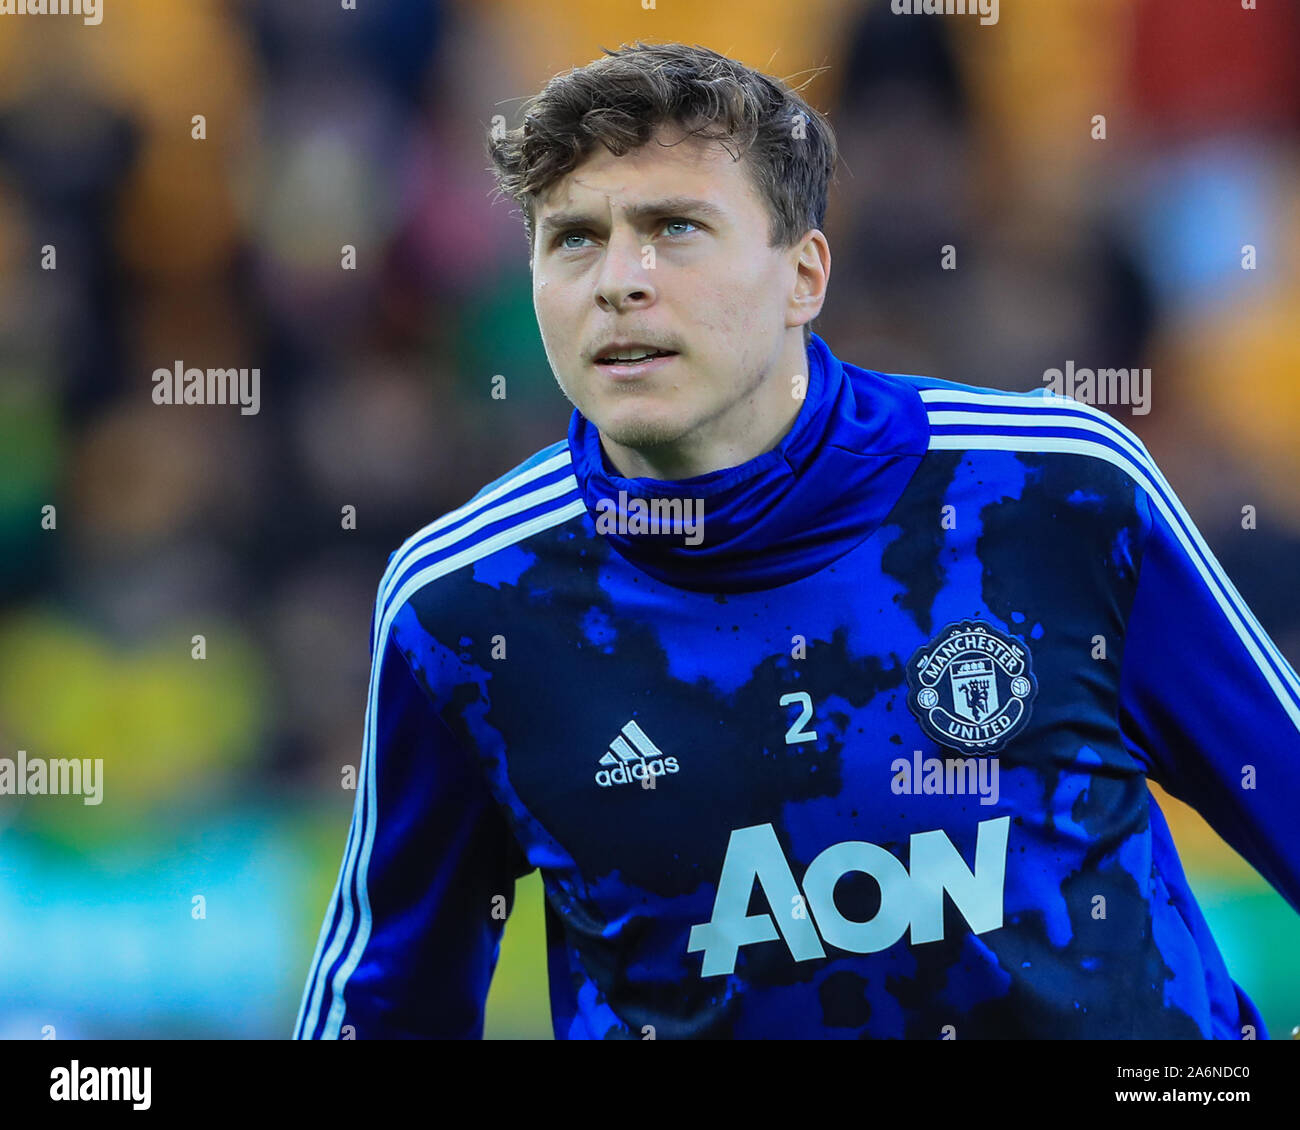 27th October 2019, Carrow Road, Norwich, England; Premier League, Norwich City v Manchester United :Victor Lindelof (2) of Manchester United warming up  Credit: Mark Cosgrove/News Images Stock Photo